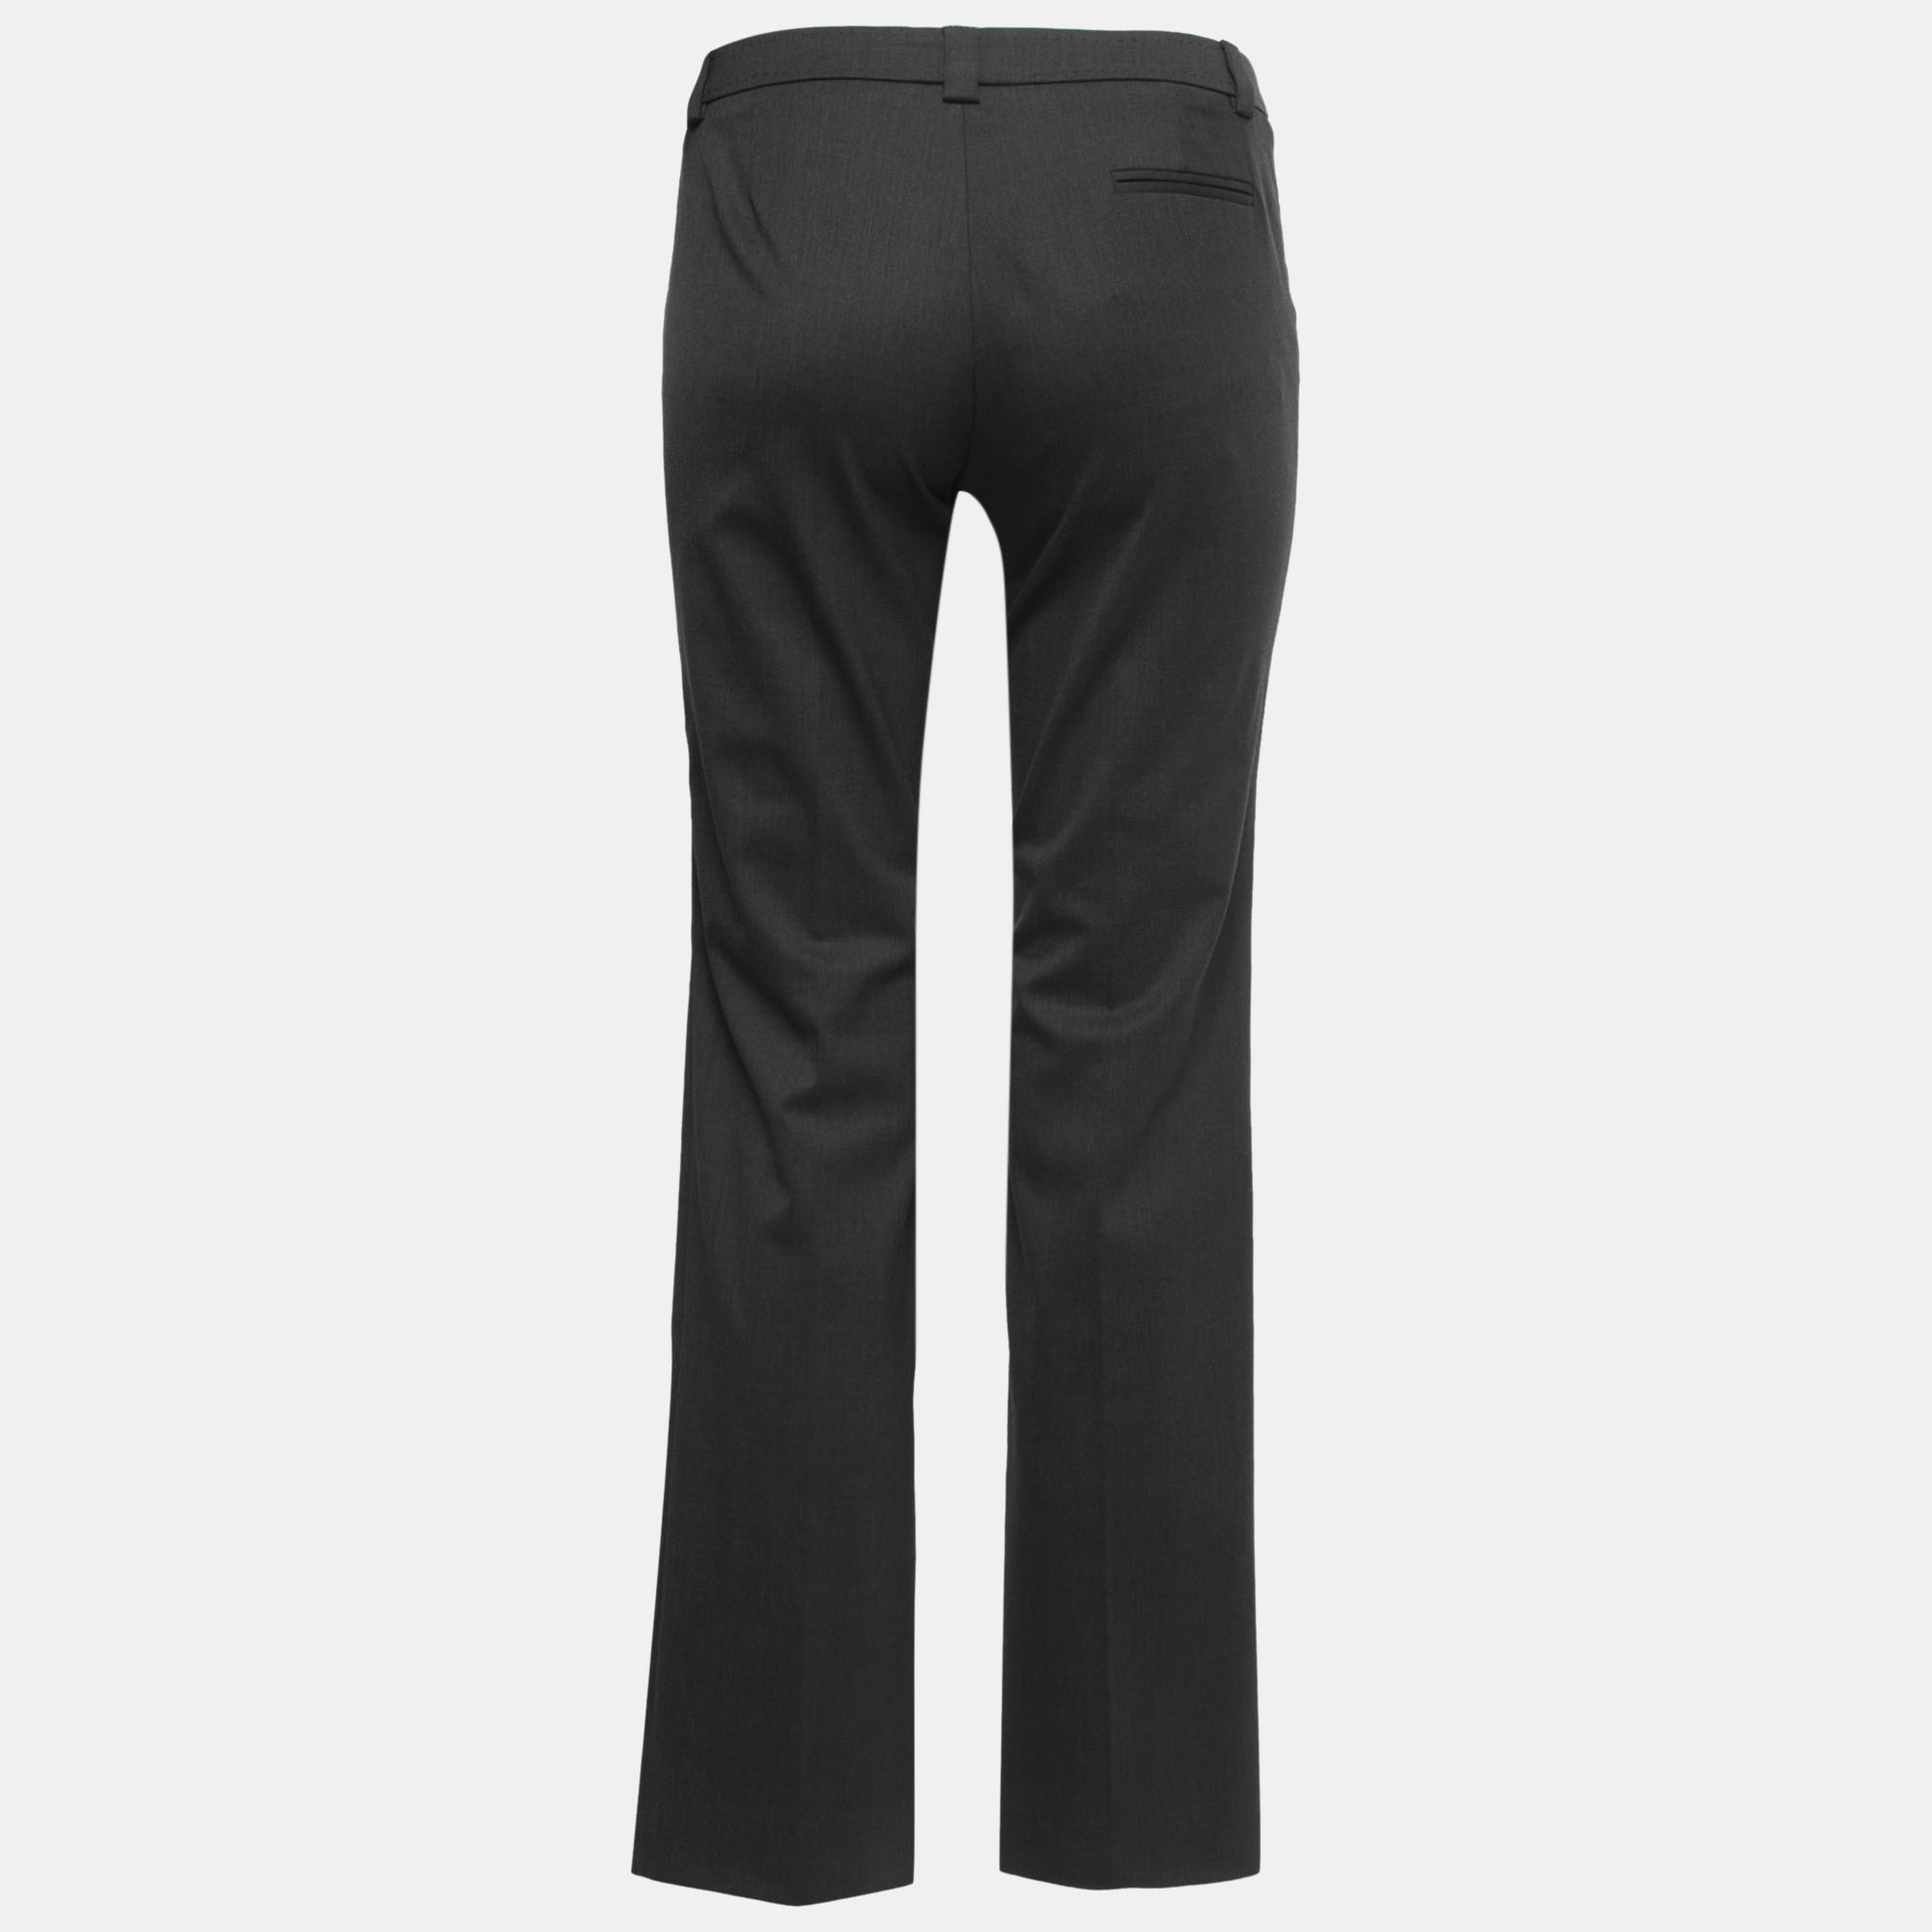 

Emporio Armani Charcoal Grey Wool Tailored Trousers